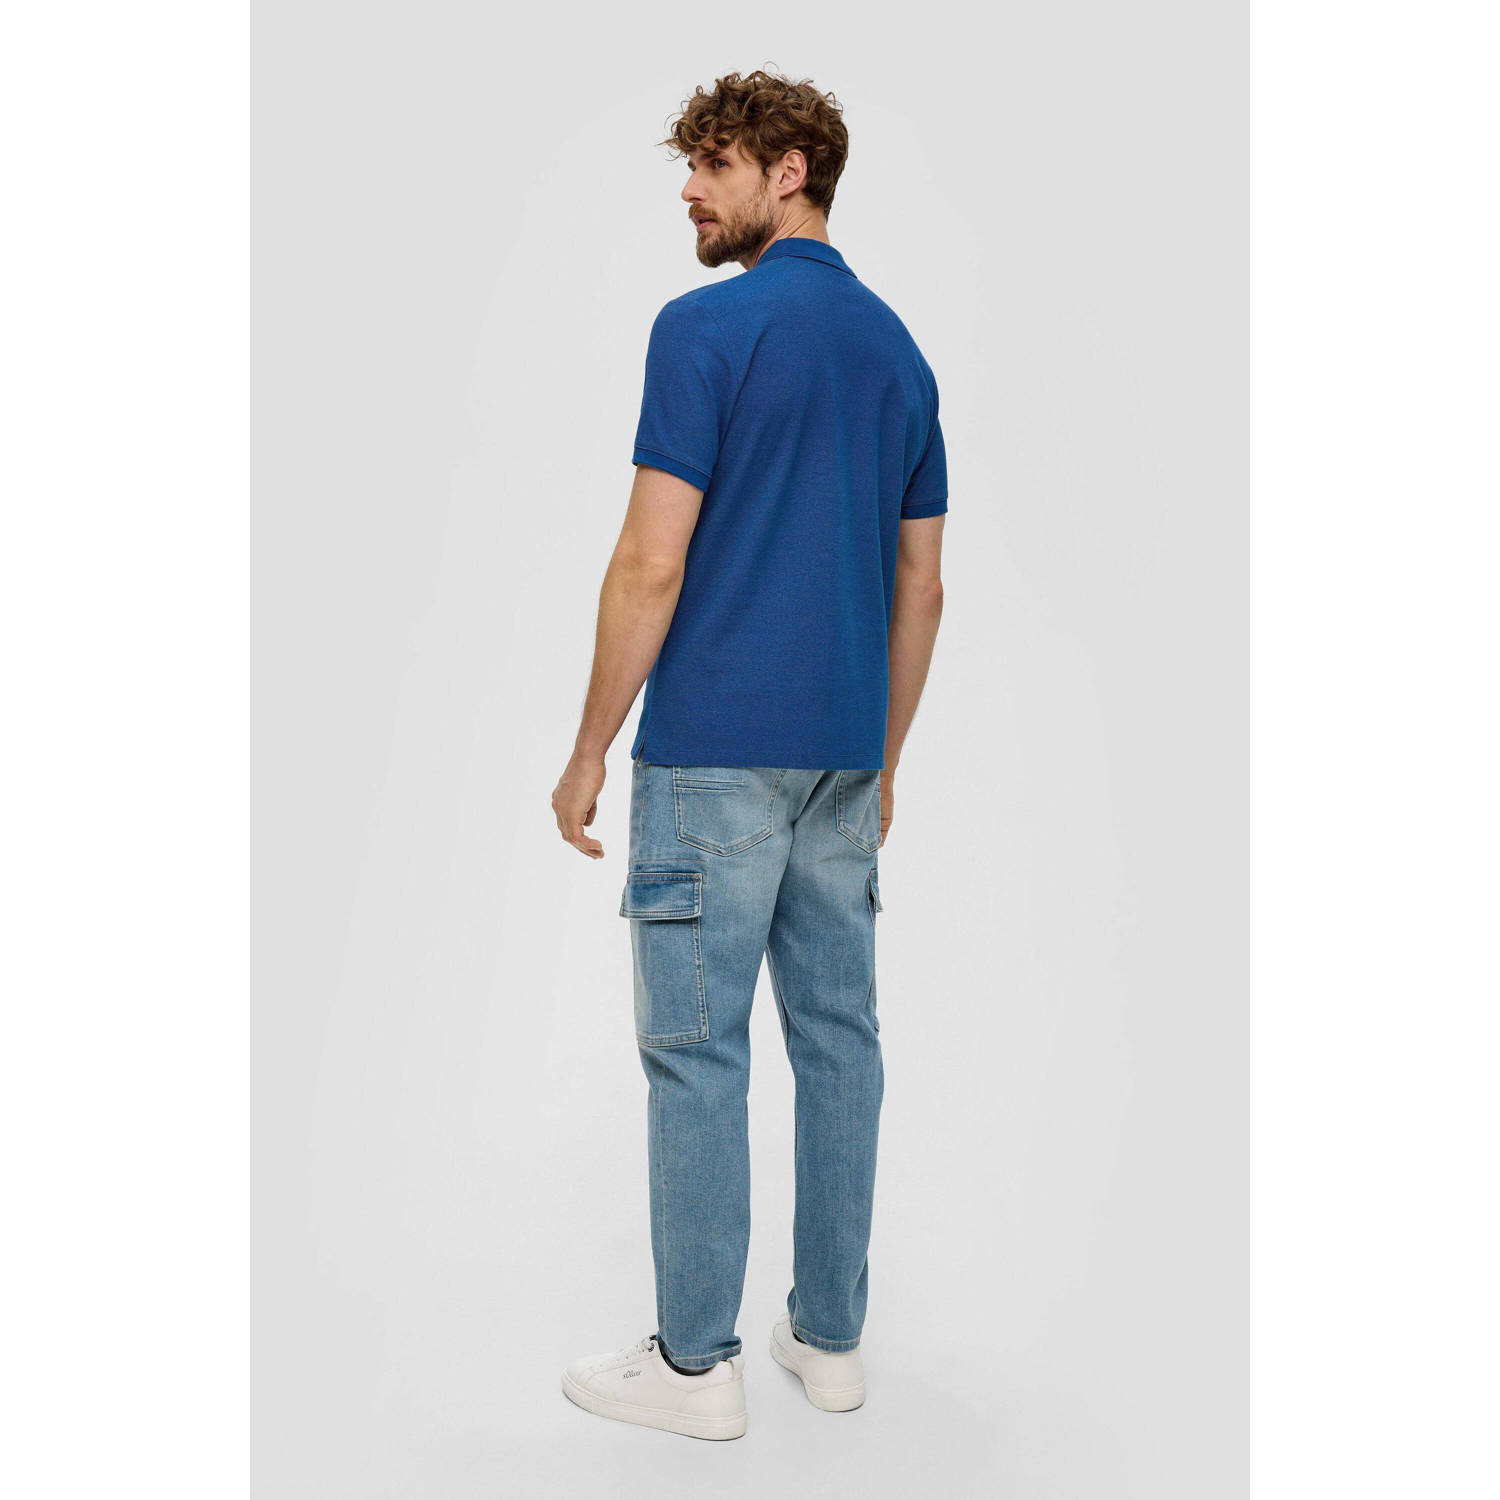 s.Oliver regular fit polo blauw